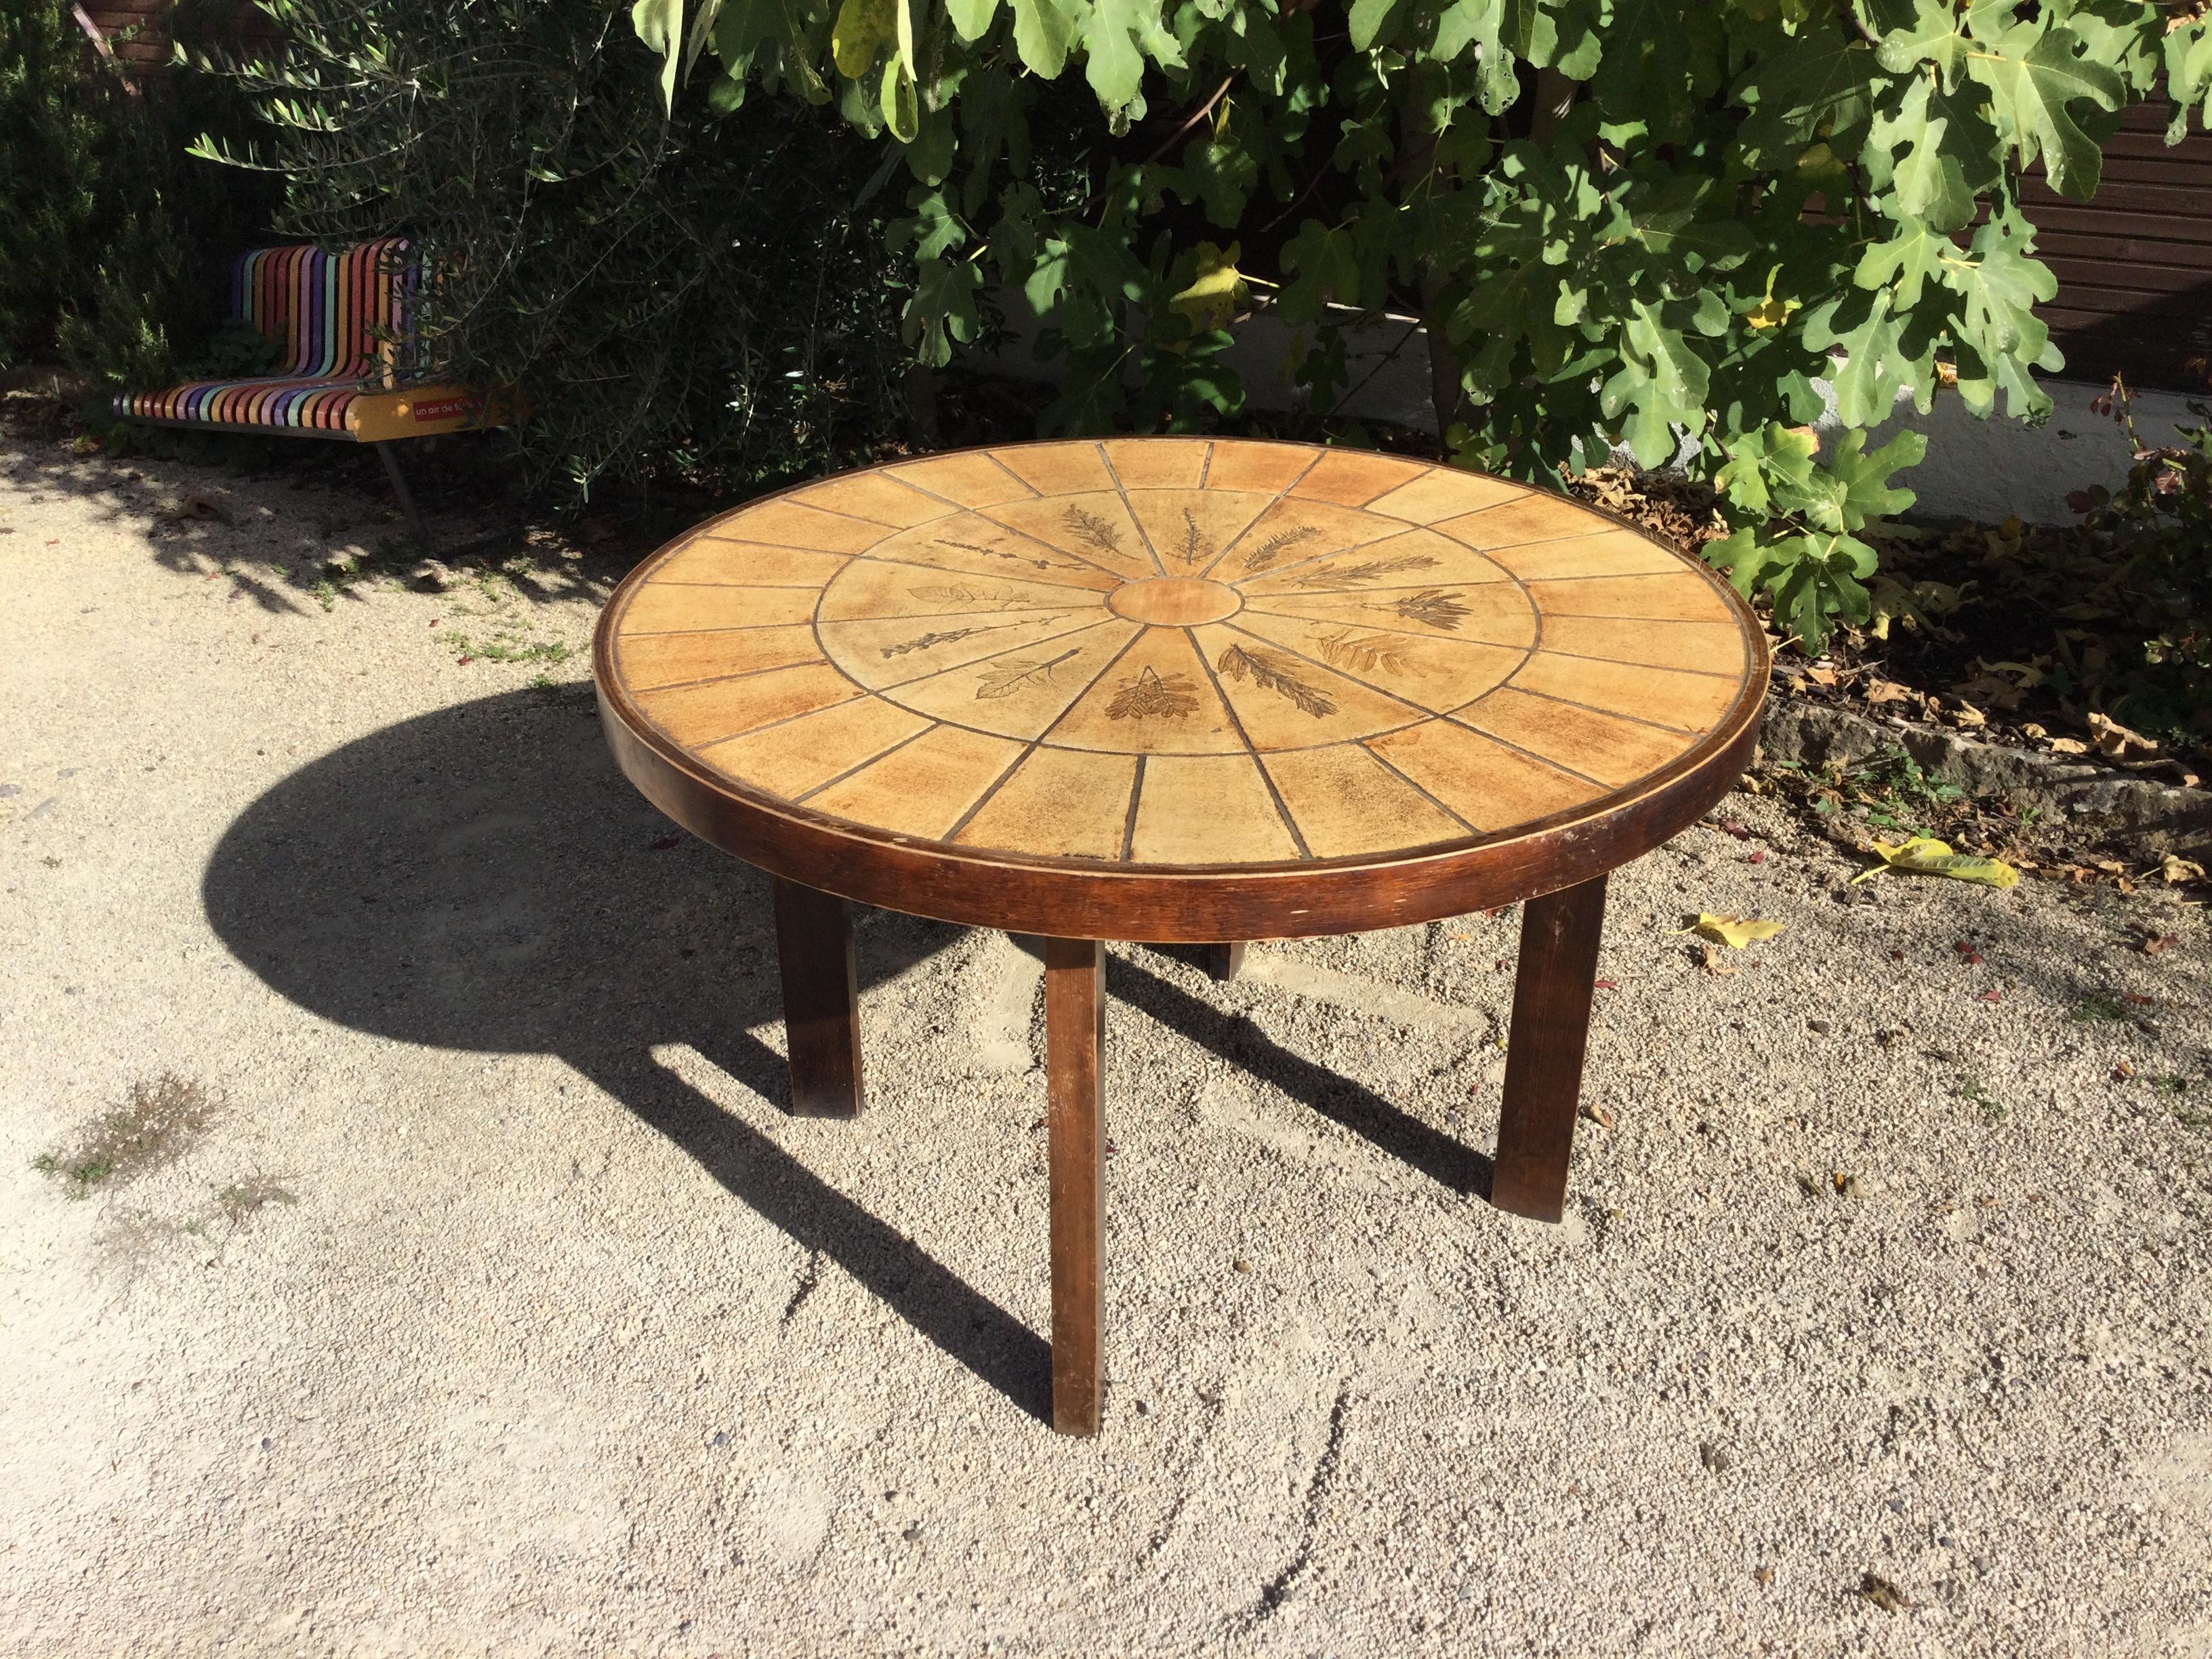 Rare dining table made by Roger Capron, famous French designer in the 1960s. 
The top of the table is made with ceramics and we can see different herbs. The base is made with wood. Show some consistent with age and use. 
There are some model like